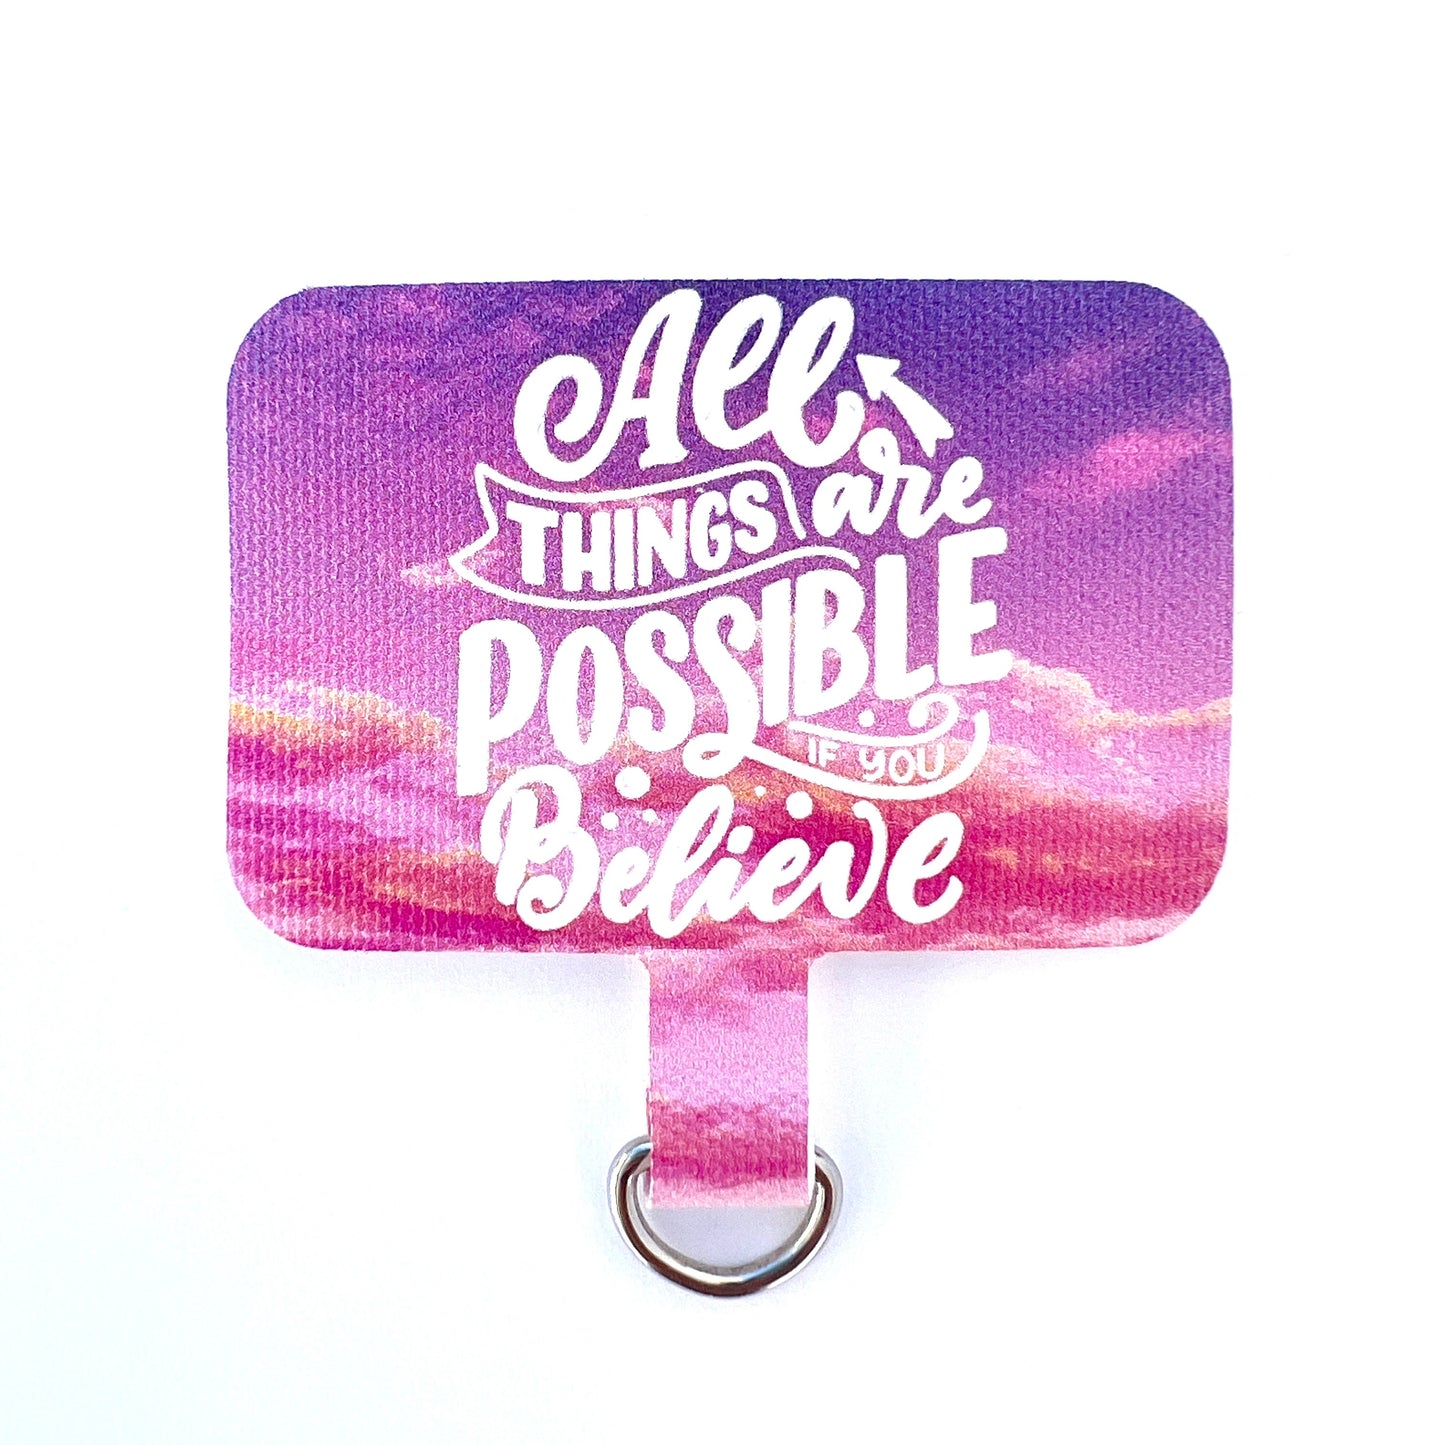 All things are possible Phone Connector Patch